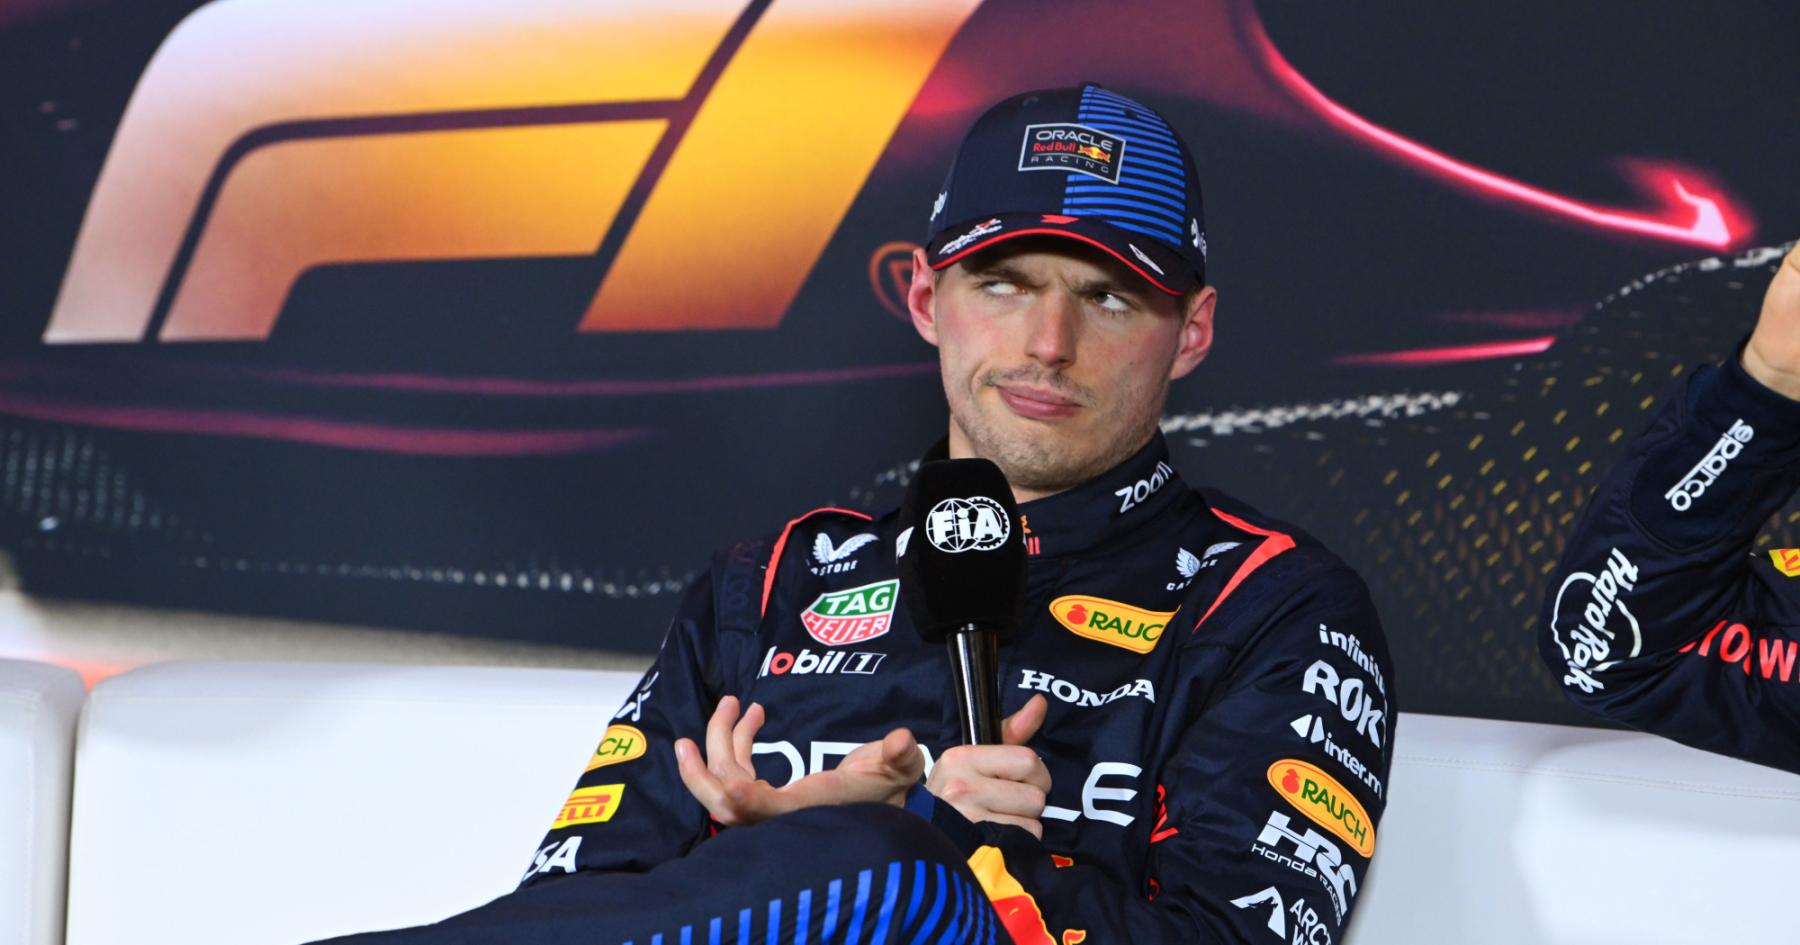 Poll: Will Verstappen be driving for Red Bull or Mercedes in F1 next season?